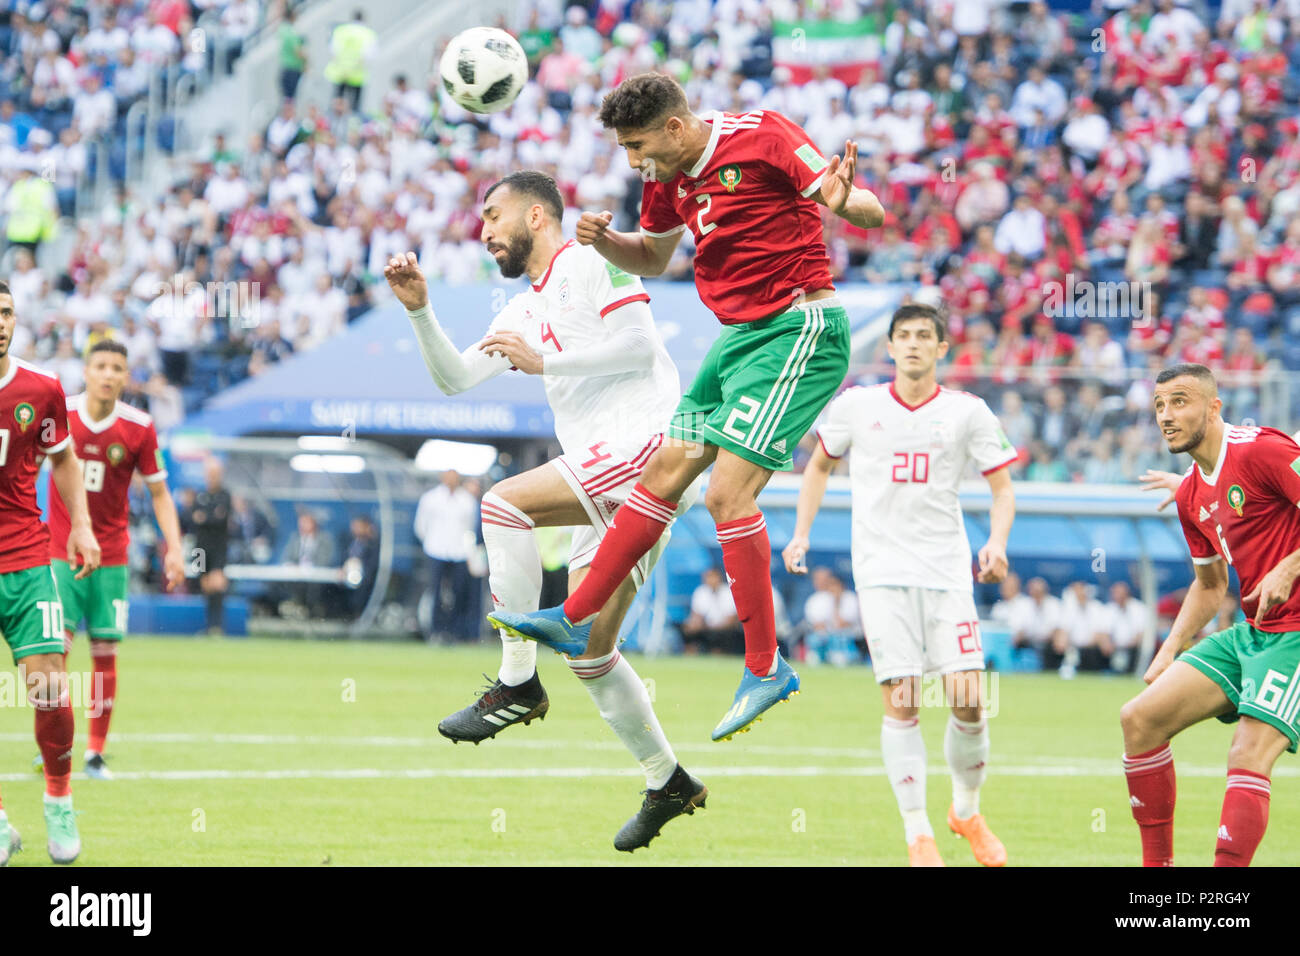 Roozbeh CHESHMI (left, IRN) has the second offense versus Achraf HAKIMI (MAR), action, duels, header duel, Morocco (MAR) - Iran (IRN) 0: 1, preliminary round, group B, game 4, on 06/15/2018 in St. Petersburg; Football World Cup 2018 in Russia from 14.06. - 15.07.2018. | usage worldwide Stock Photo